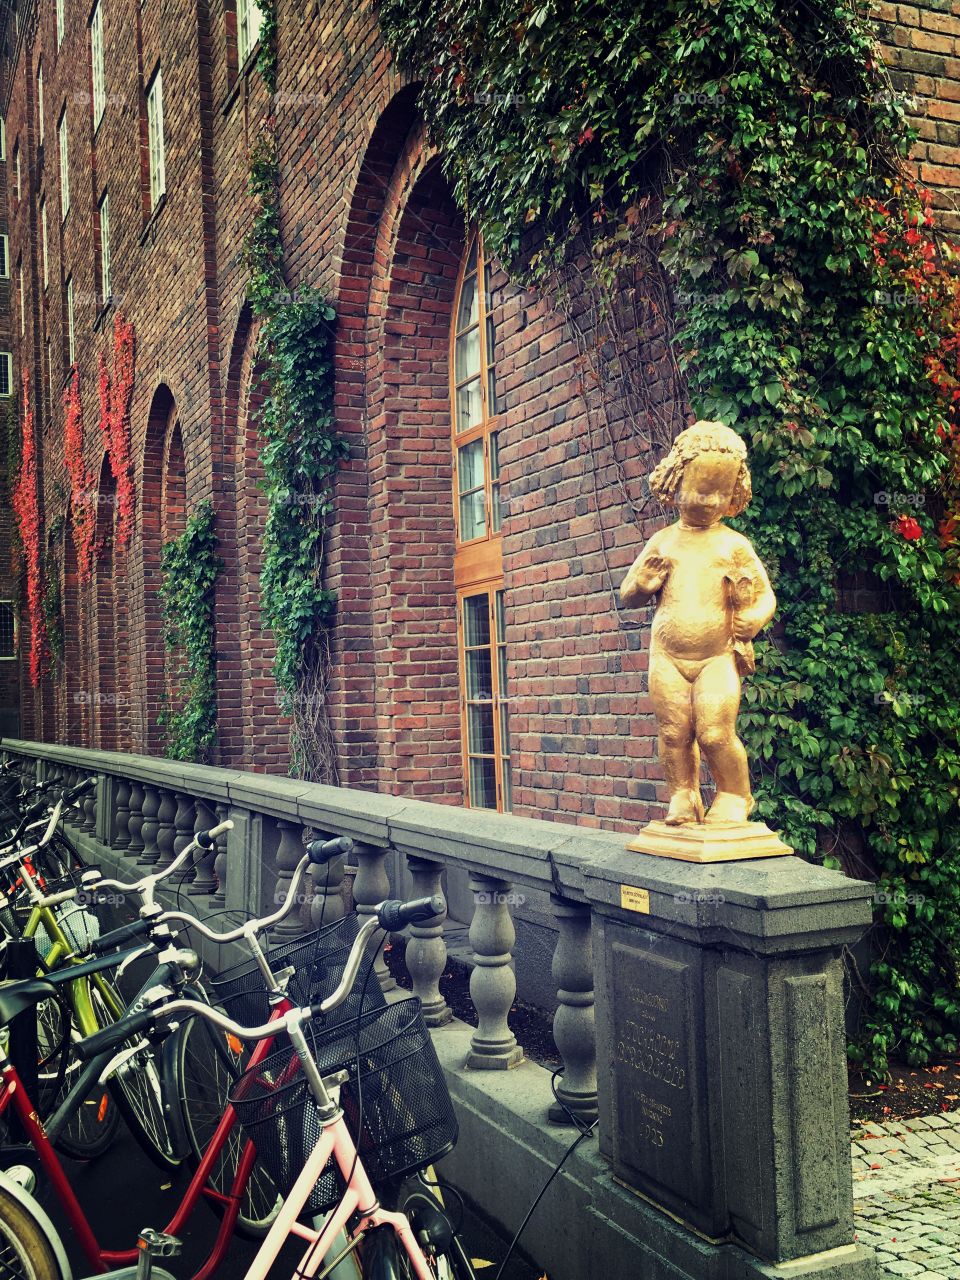 A brick building in Stockholm covered in vines and leaves with a row of bicycles leaning against it. And a golden statue of a baby 